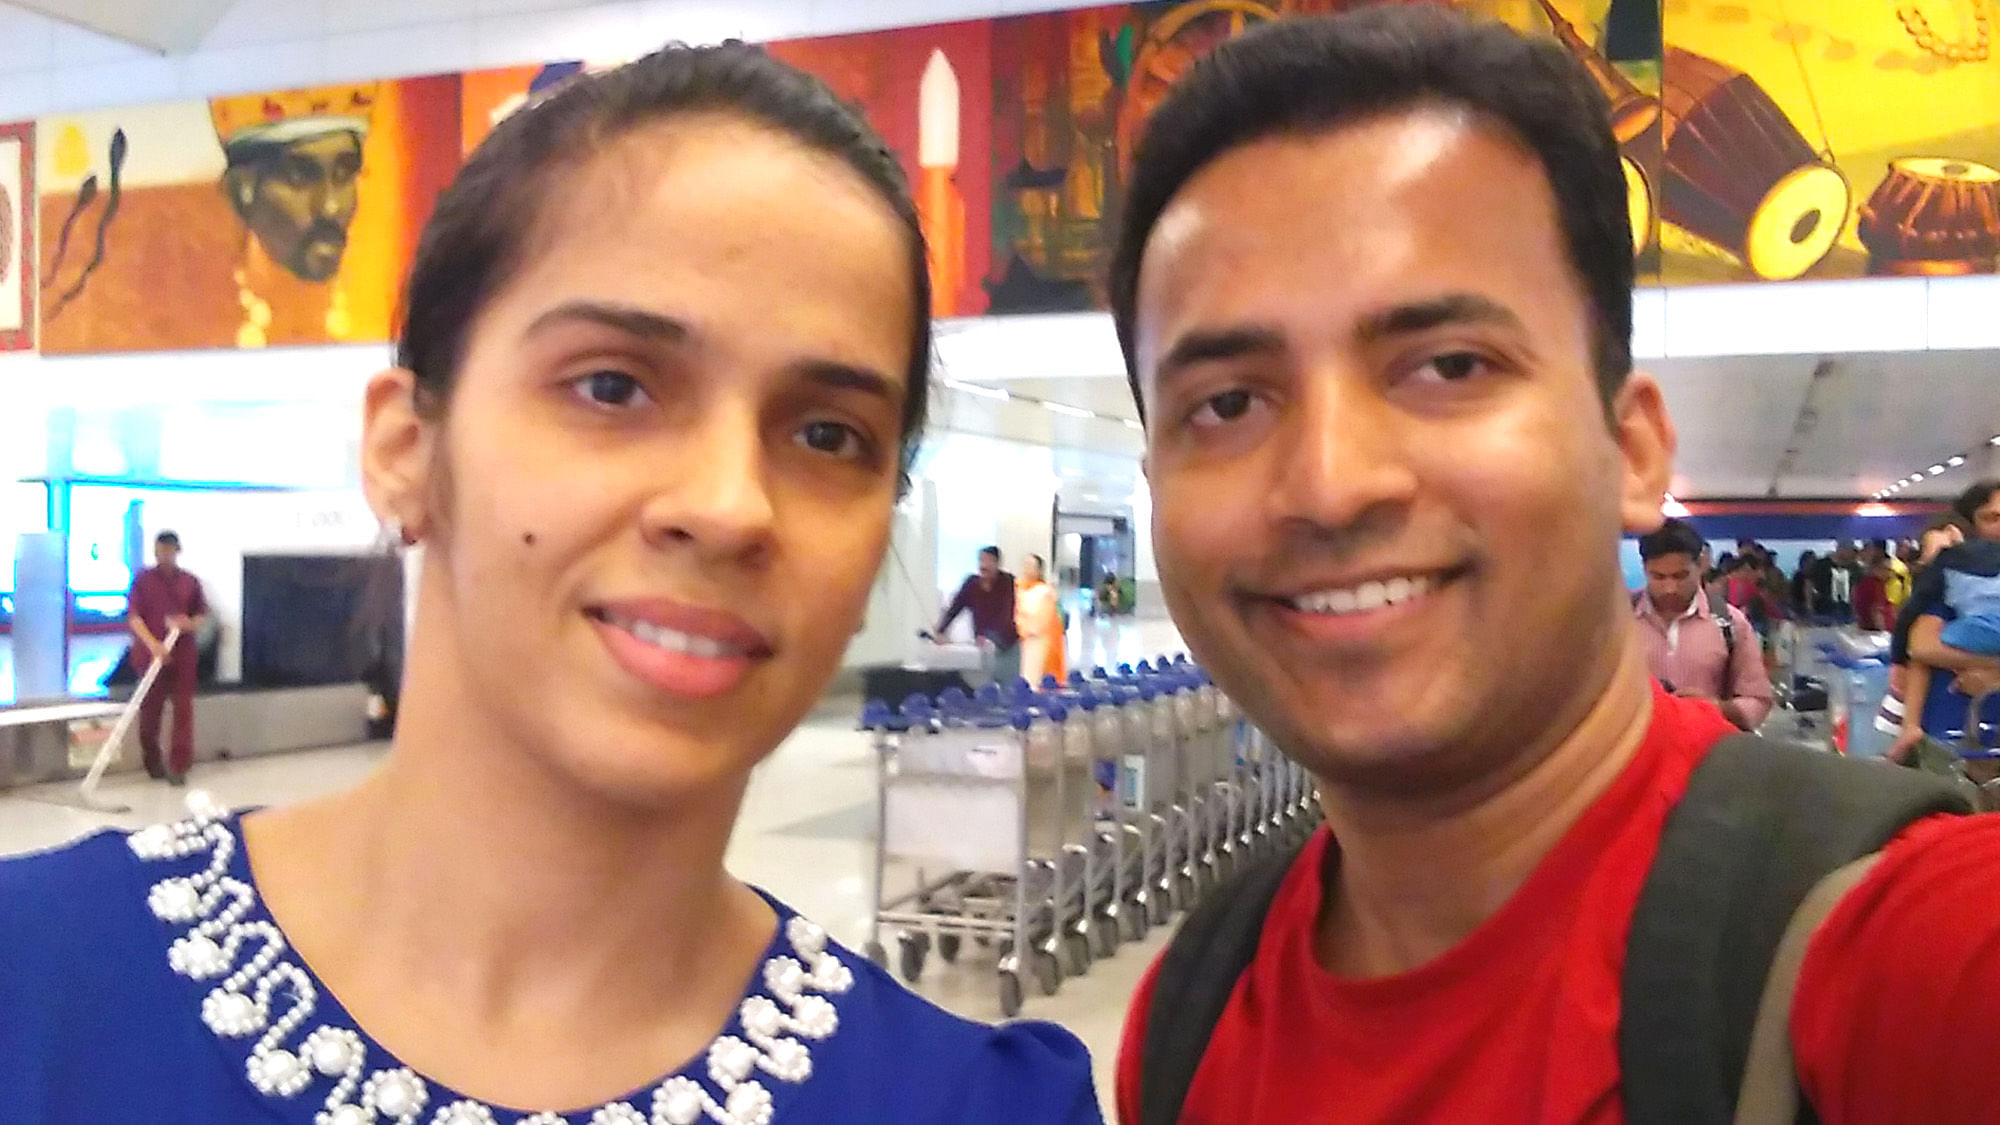 Meeting the freshest Padma Bhushan awardee, Saina Nehwal, was an exciting moment for the writer, on an equally beautiful vacation in southern India (Photo: Aaqib Raza Khan/<b>The Quint</b>)